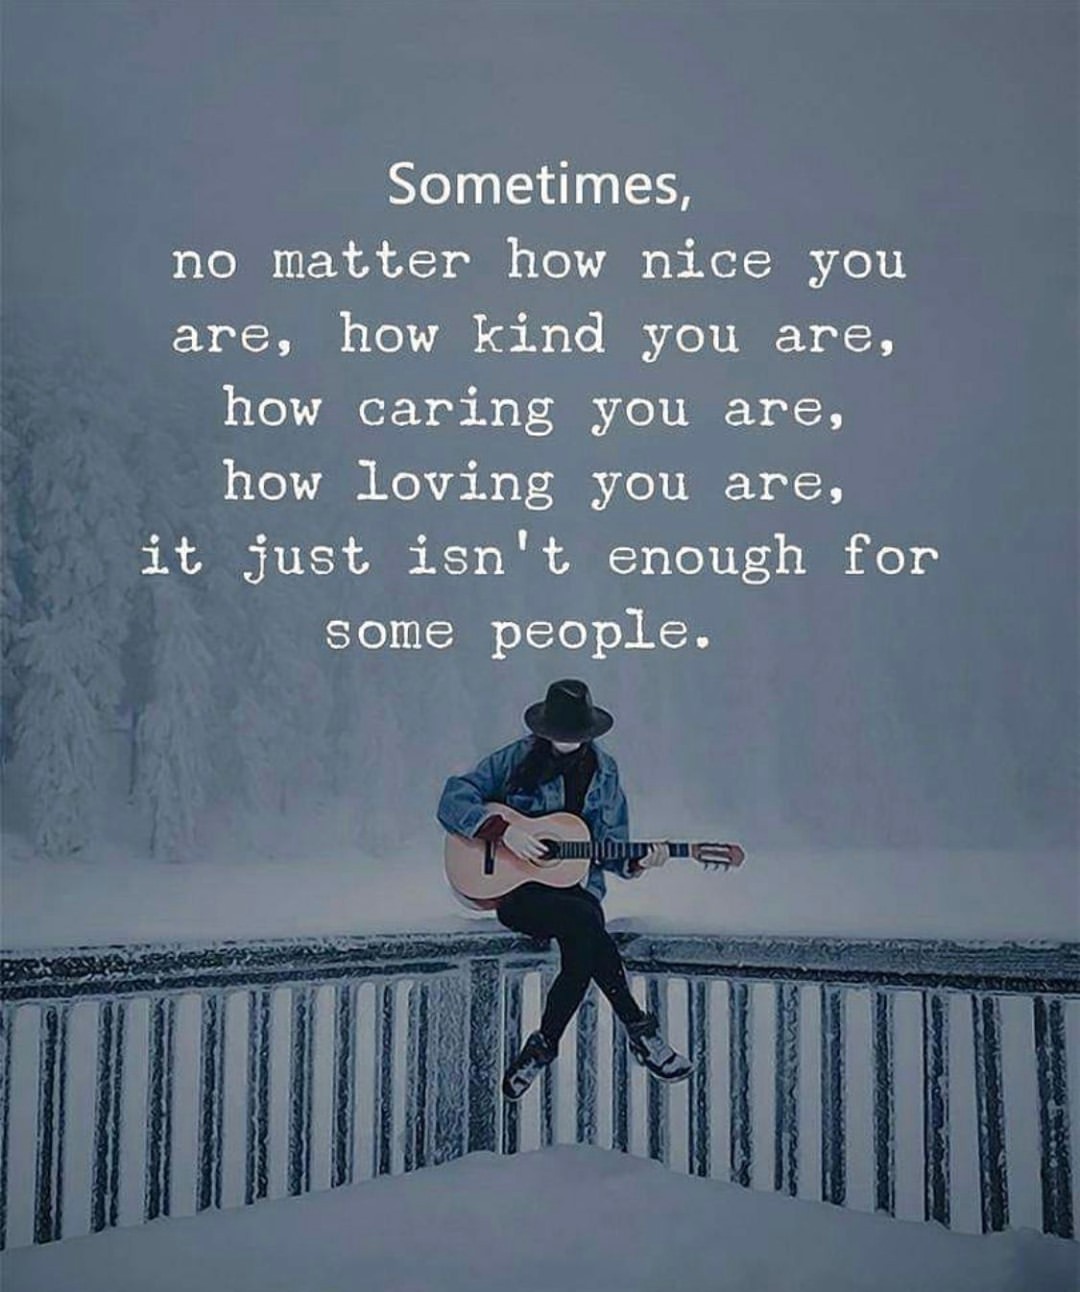 Sometimes, no matter how nice you are, how kind you are, how caring you are, how loving you are, it just isn't enough for some people.